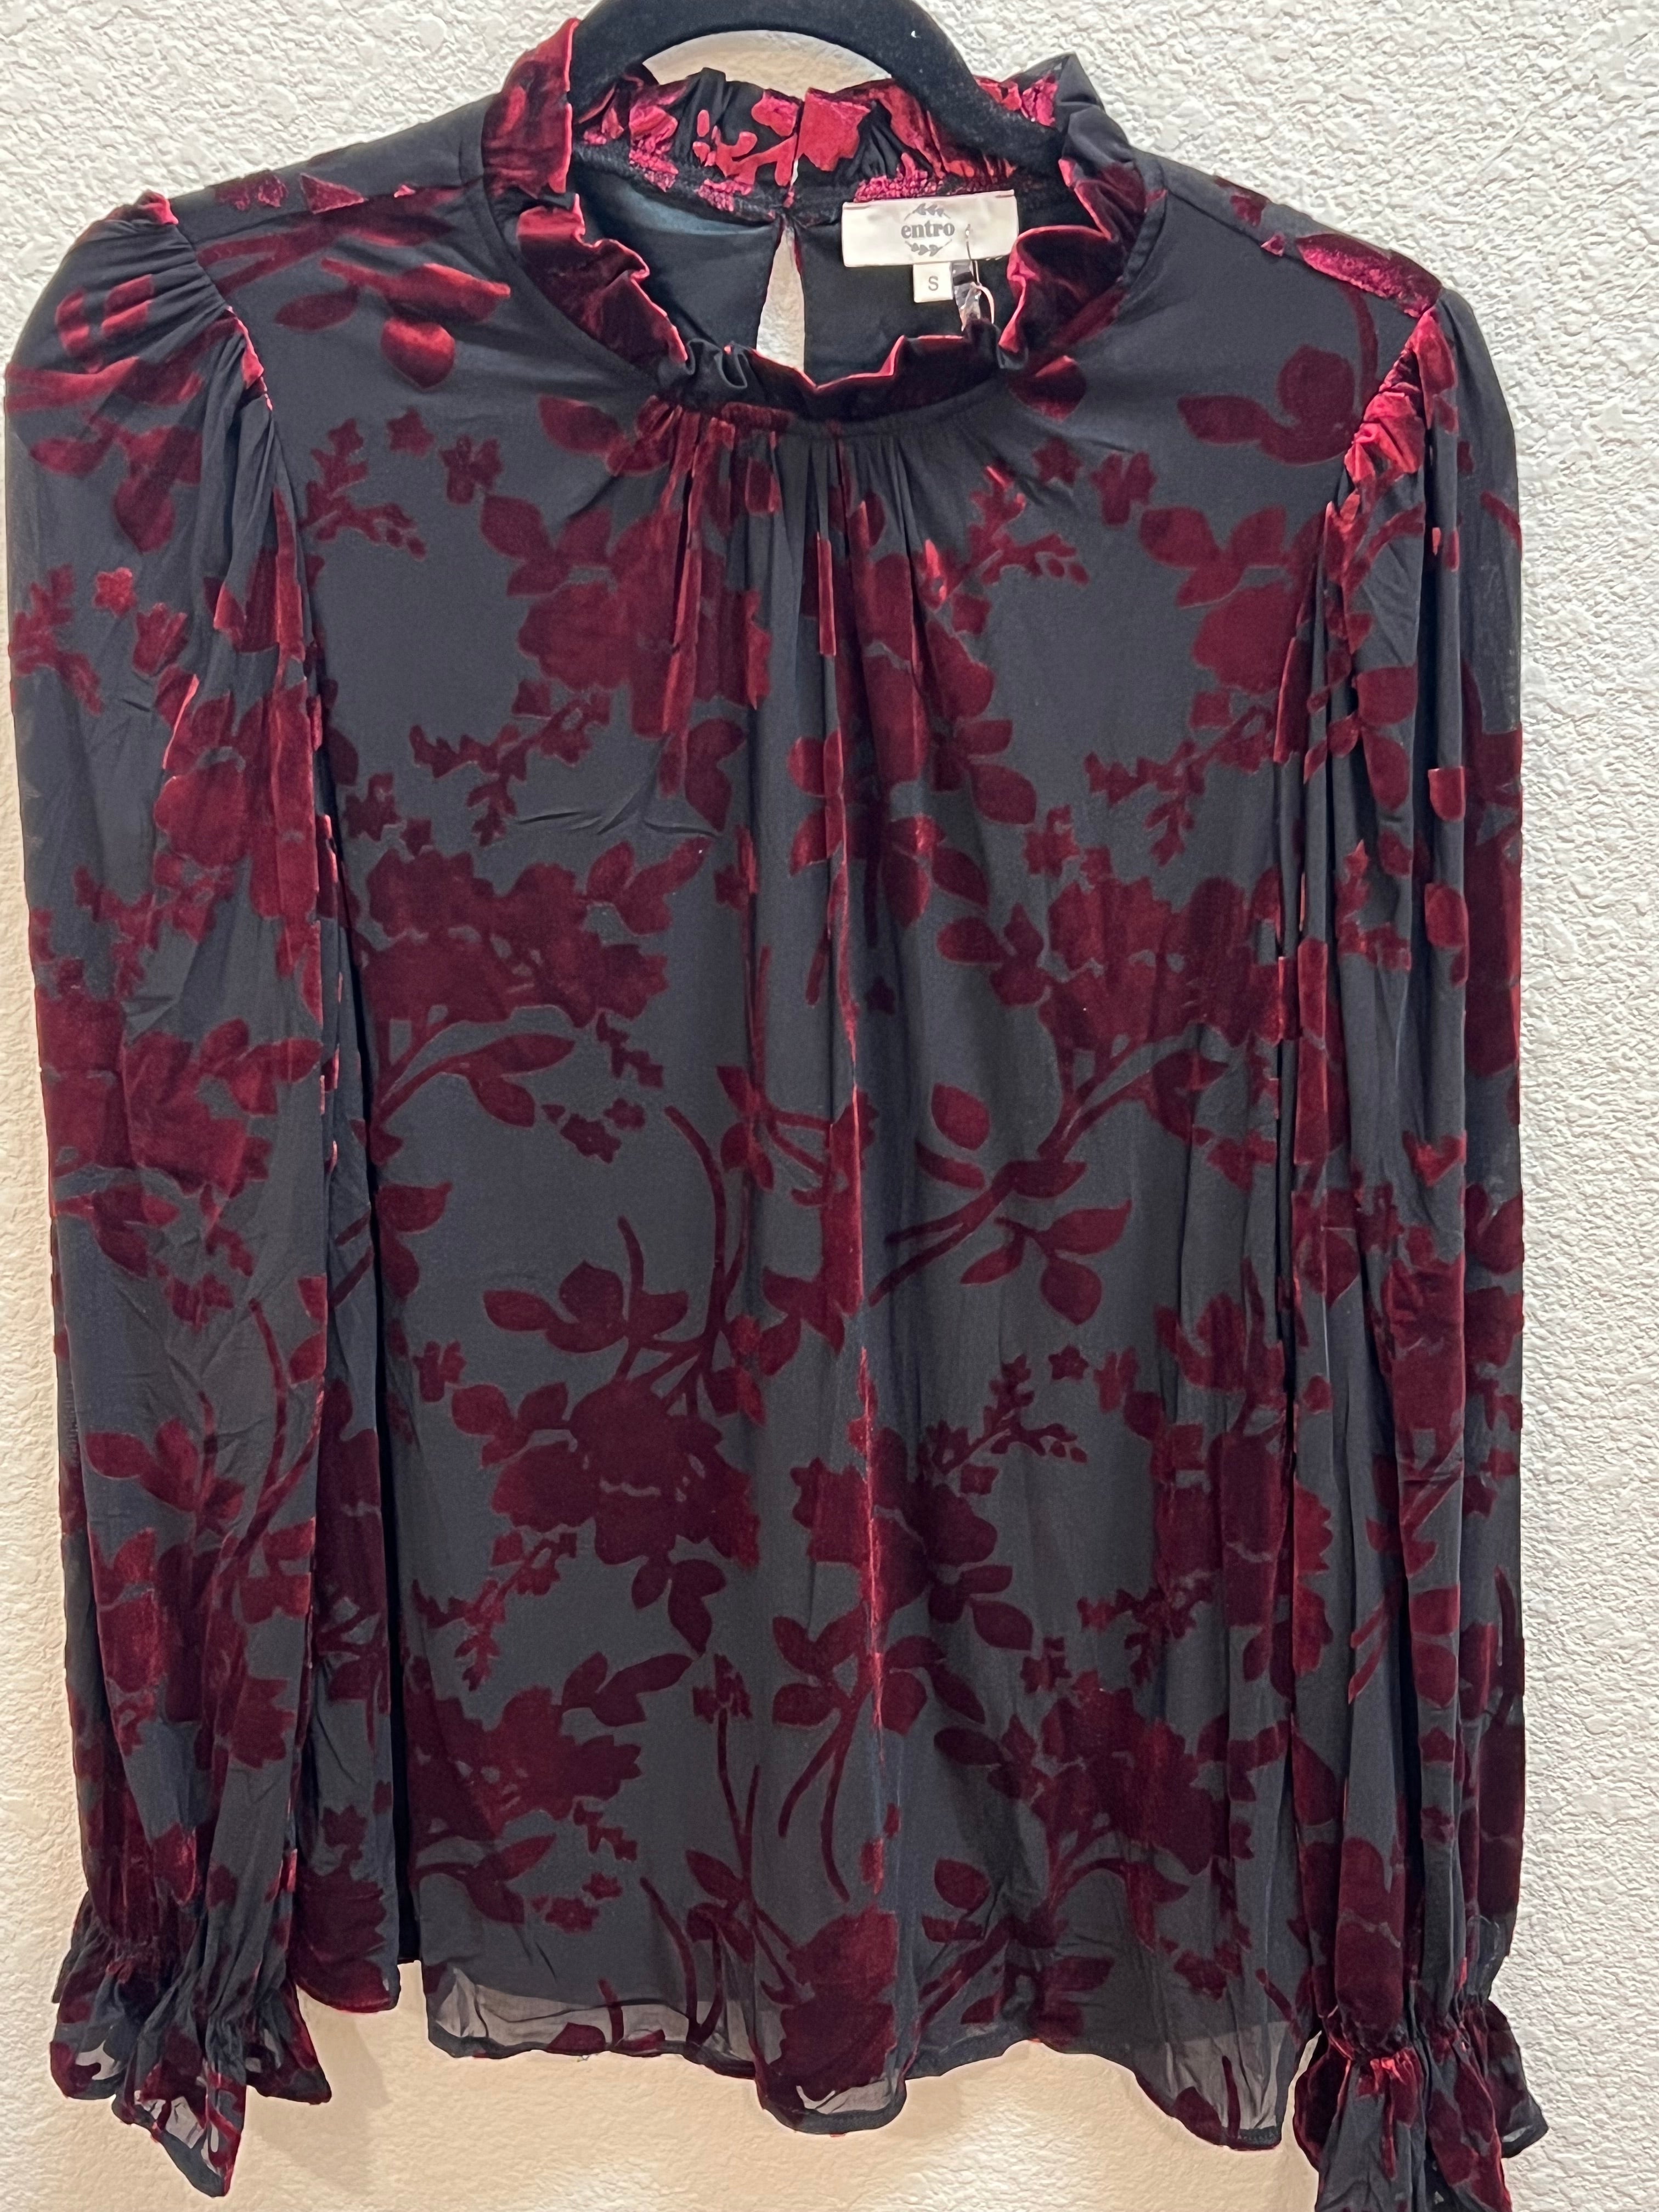 Velvet Floral print Long Sleeve top featuring ruffle detail at cuffs